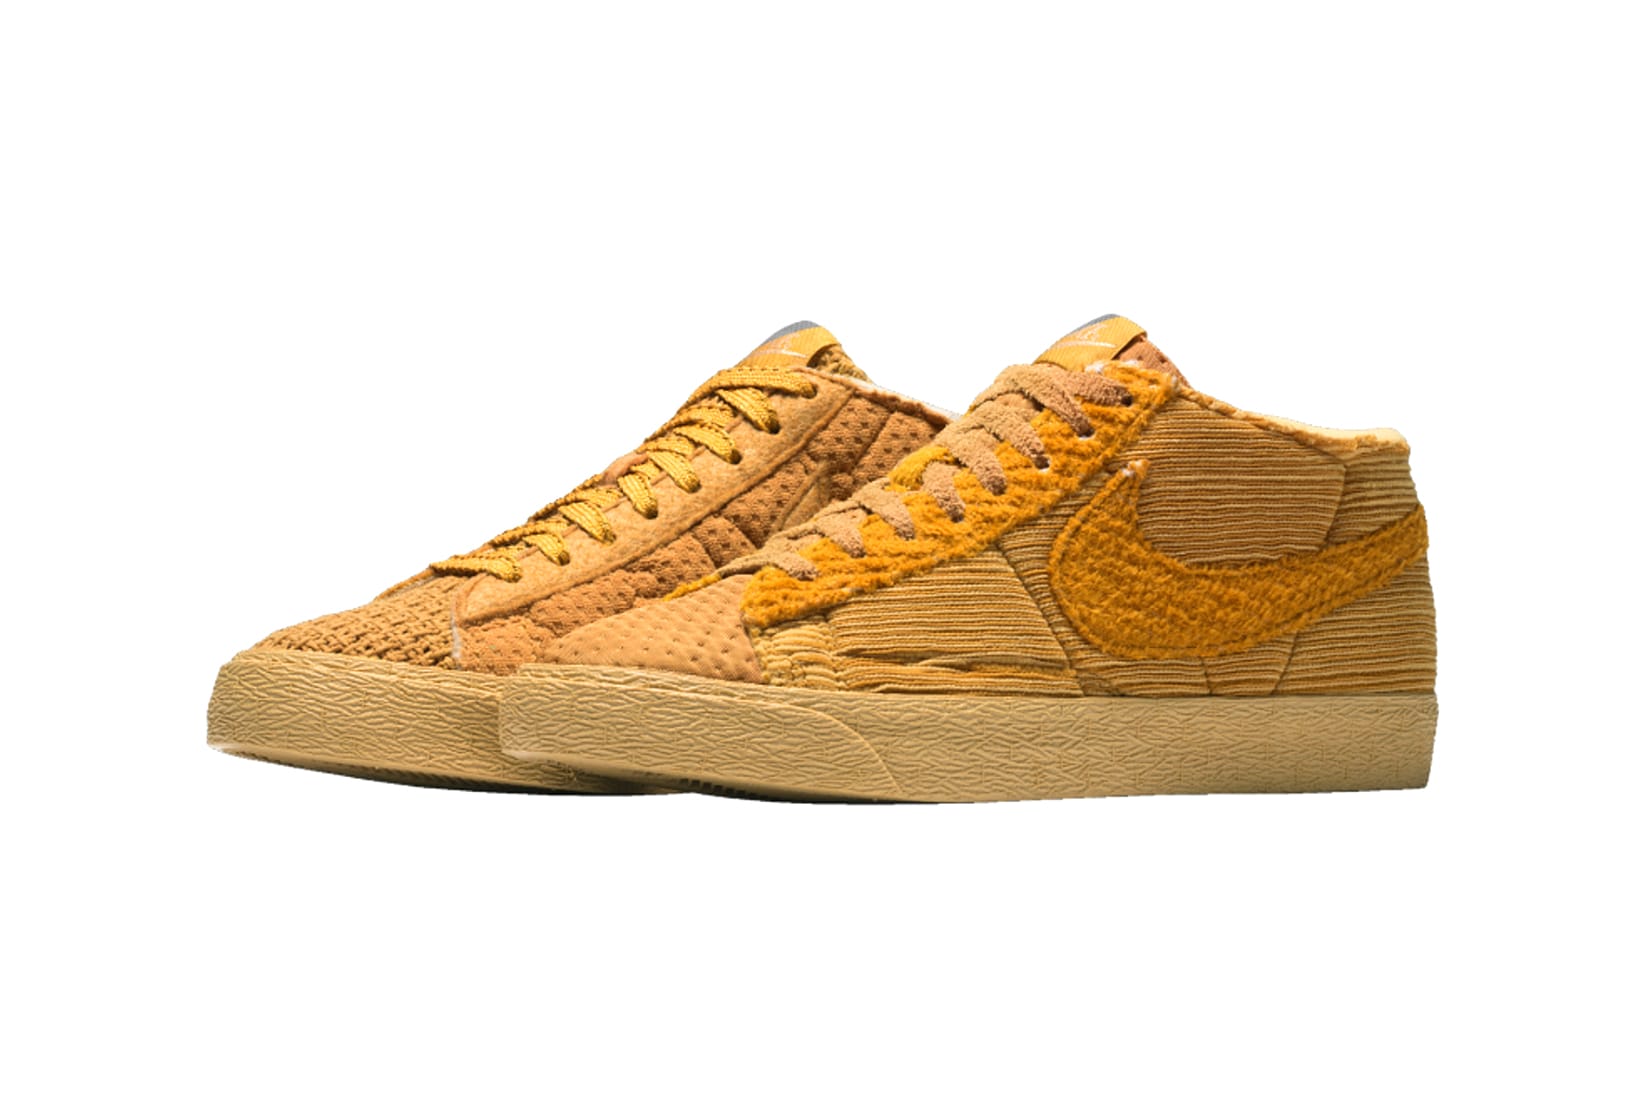 nike blazer quilted